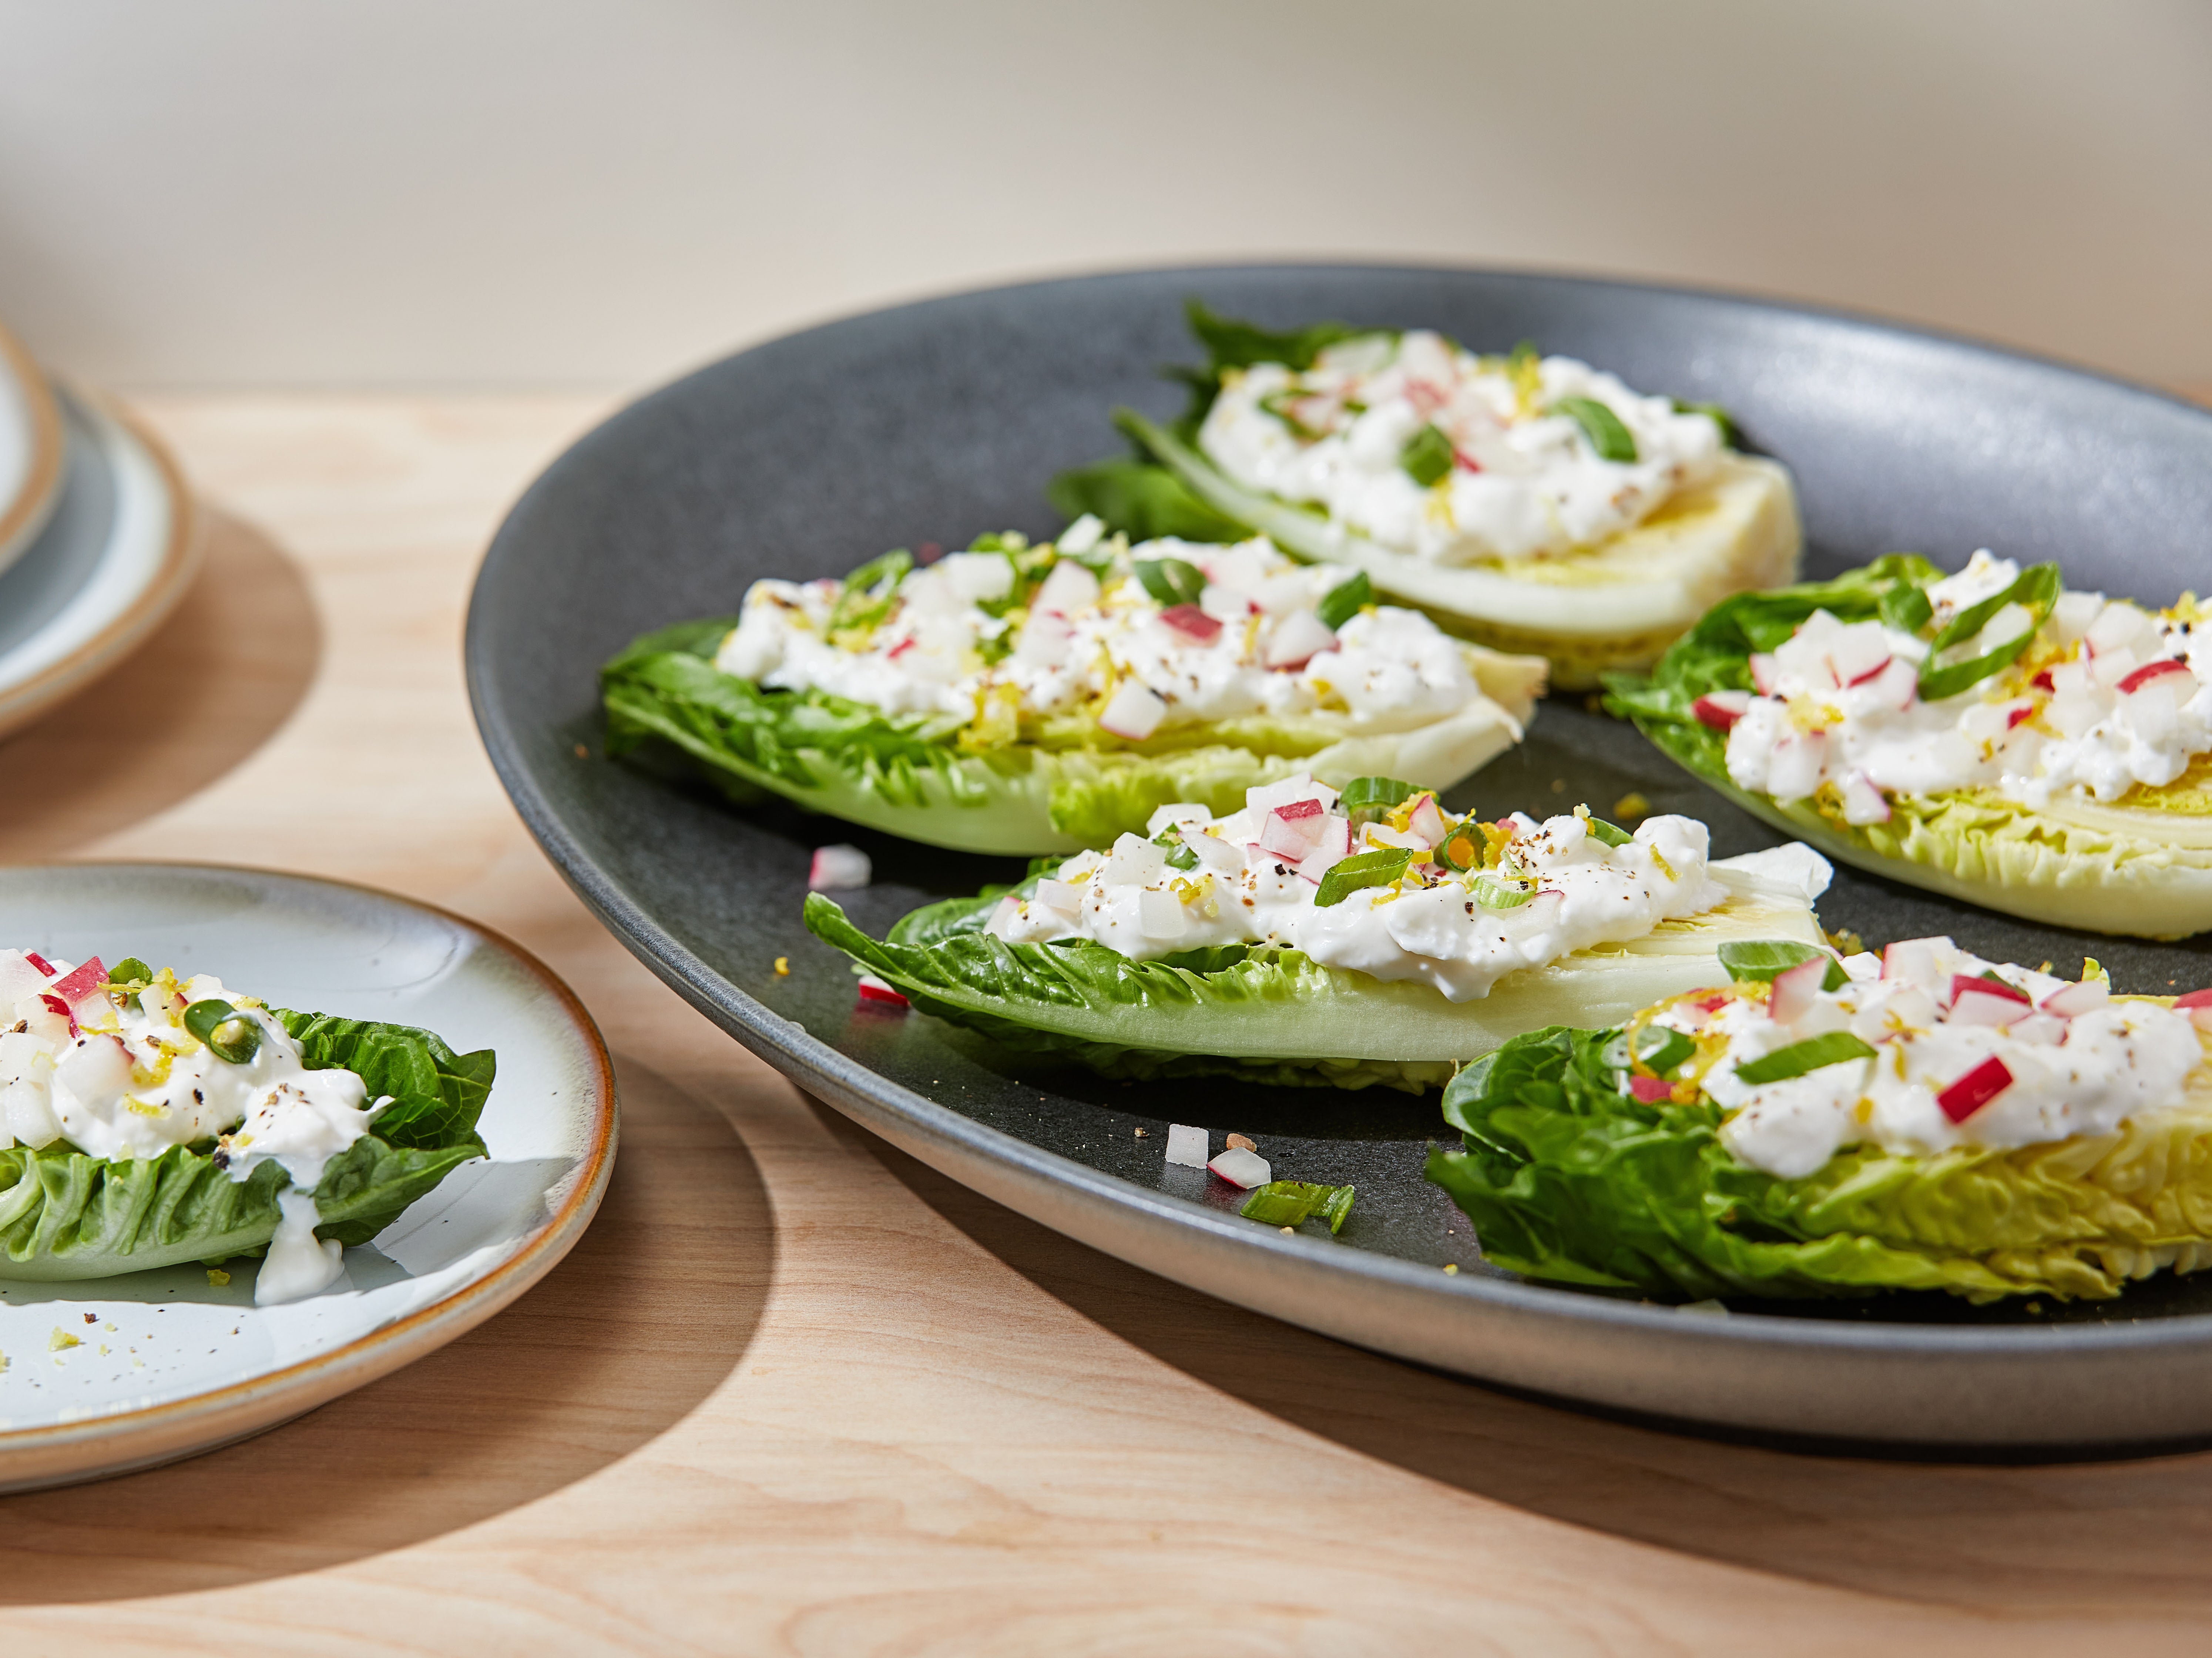 With all the creative possibilities, these gem lettuce boats with feta, radish and spring onion seem destined to go viral